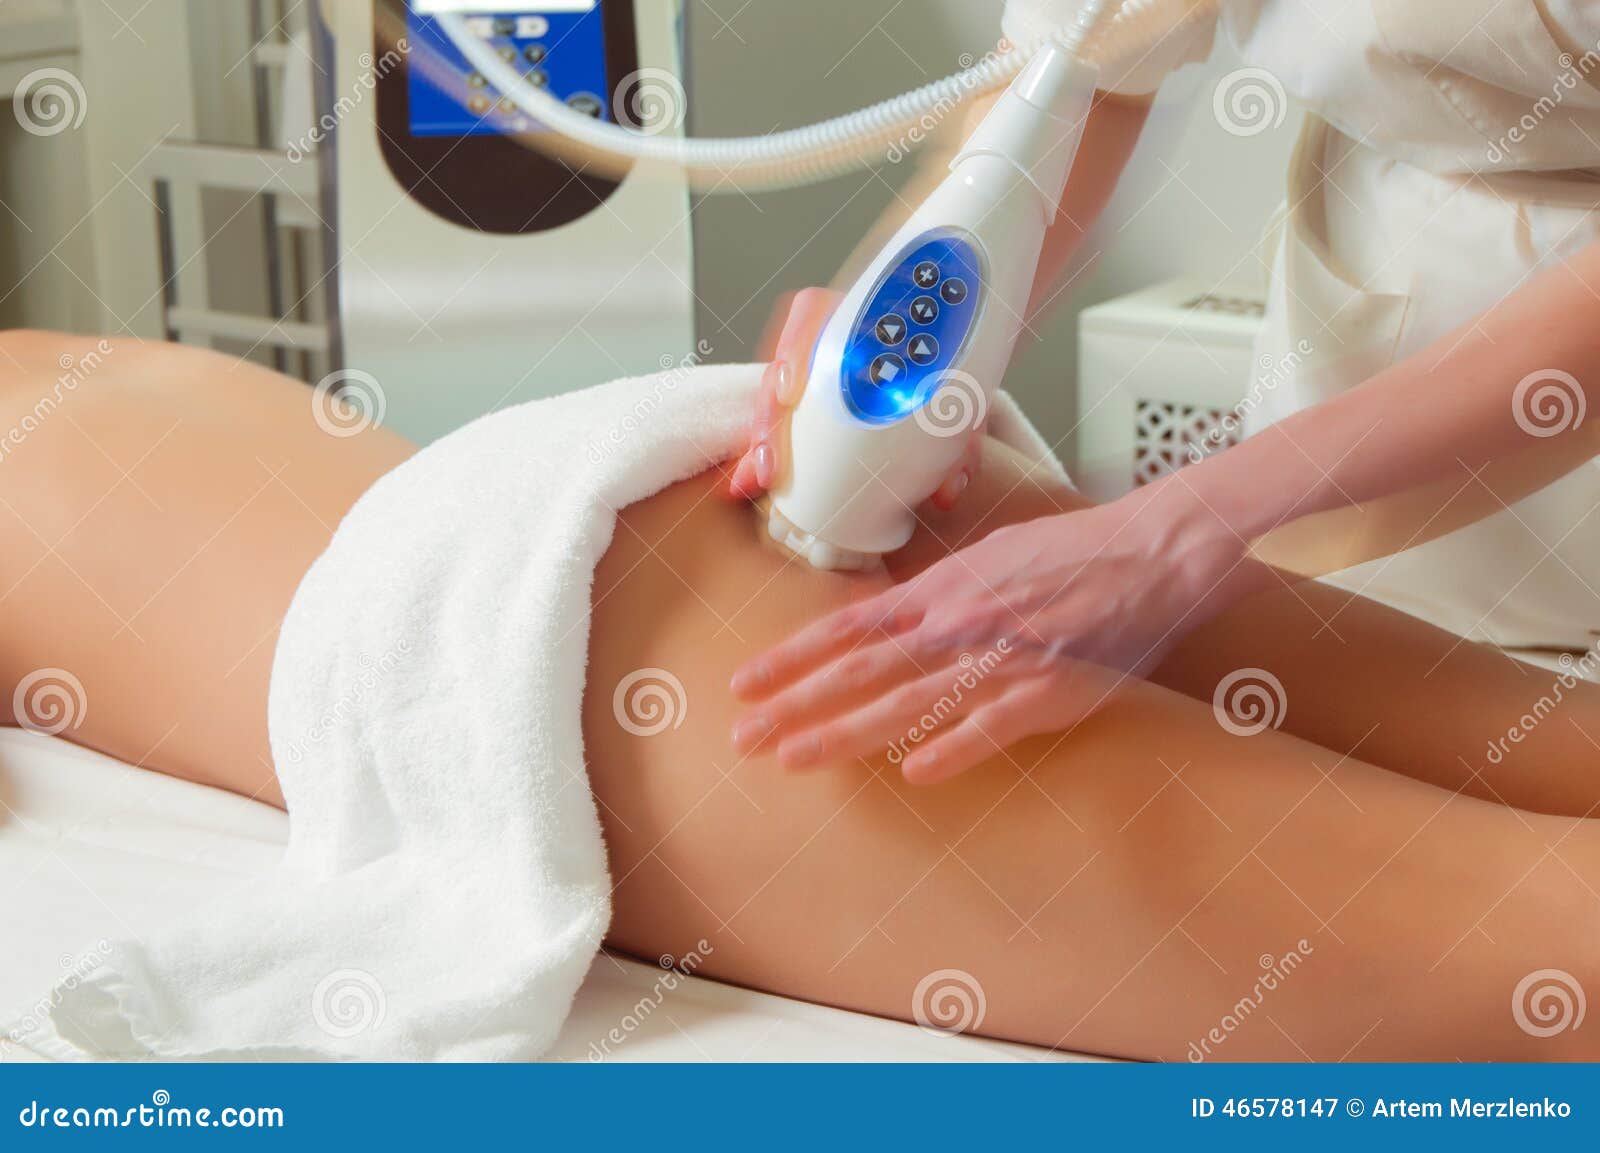 Anti cellulite treatment stock image. Image of pamper - 46578147